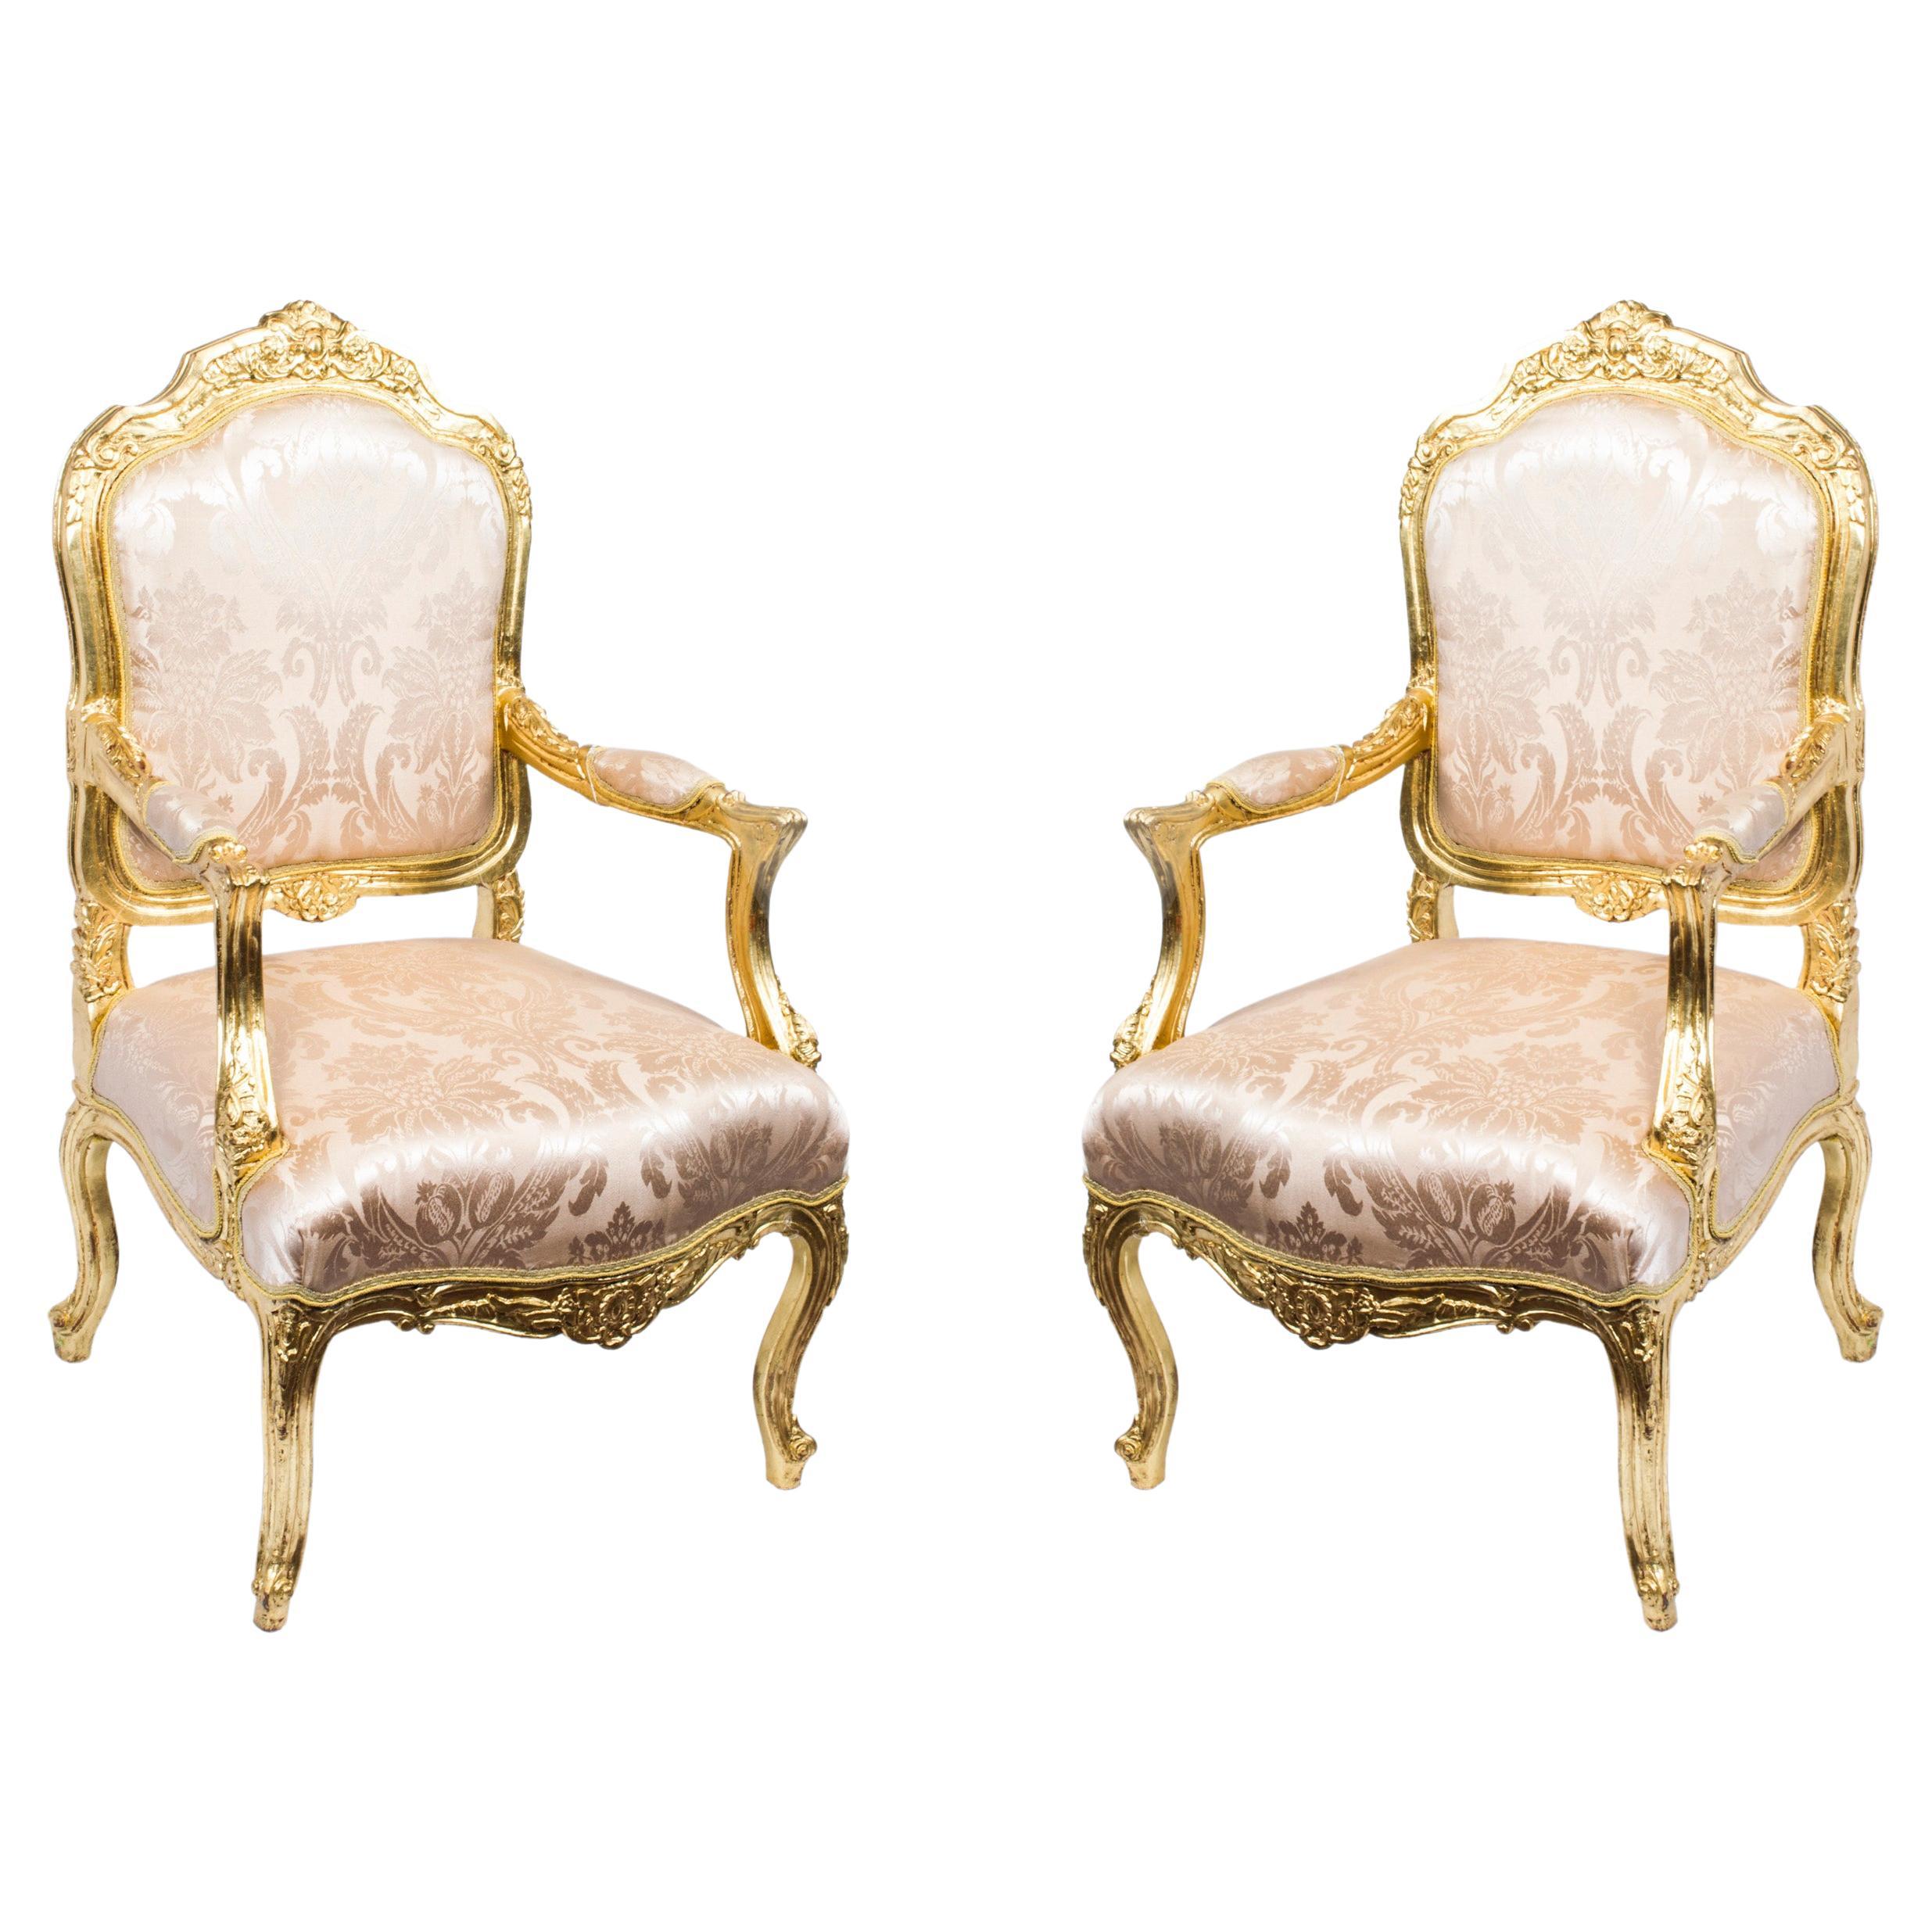 Vintage Pair Louis XV Revival French Gilded Armchairs 20th Century